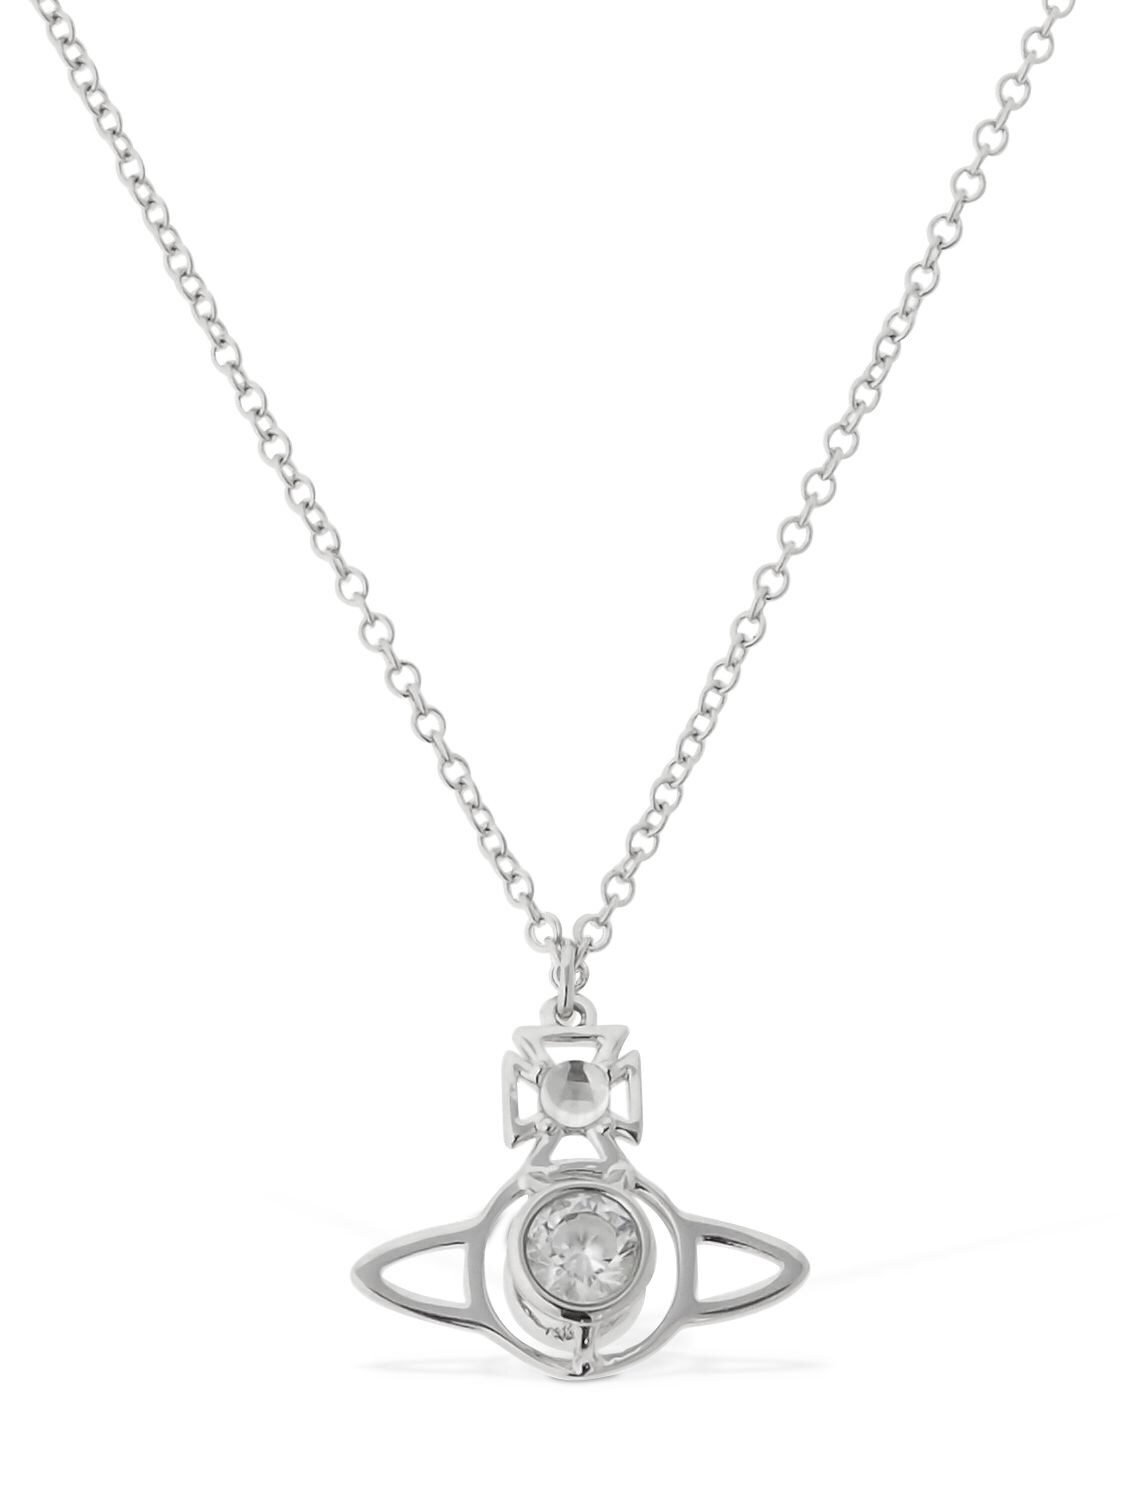 Vivienne Westwood Nora Pendant Necklace In Silver